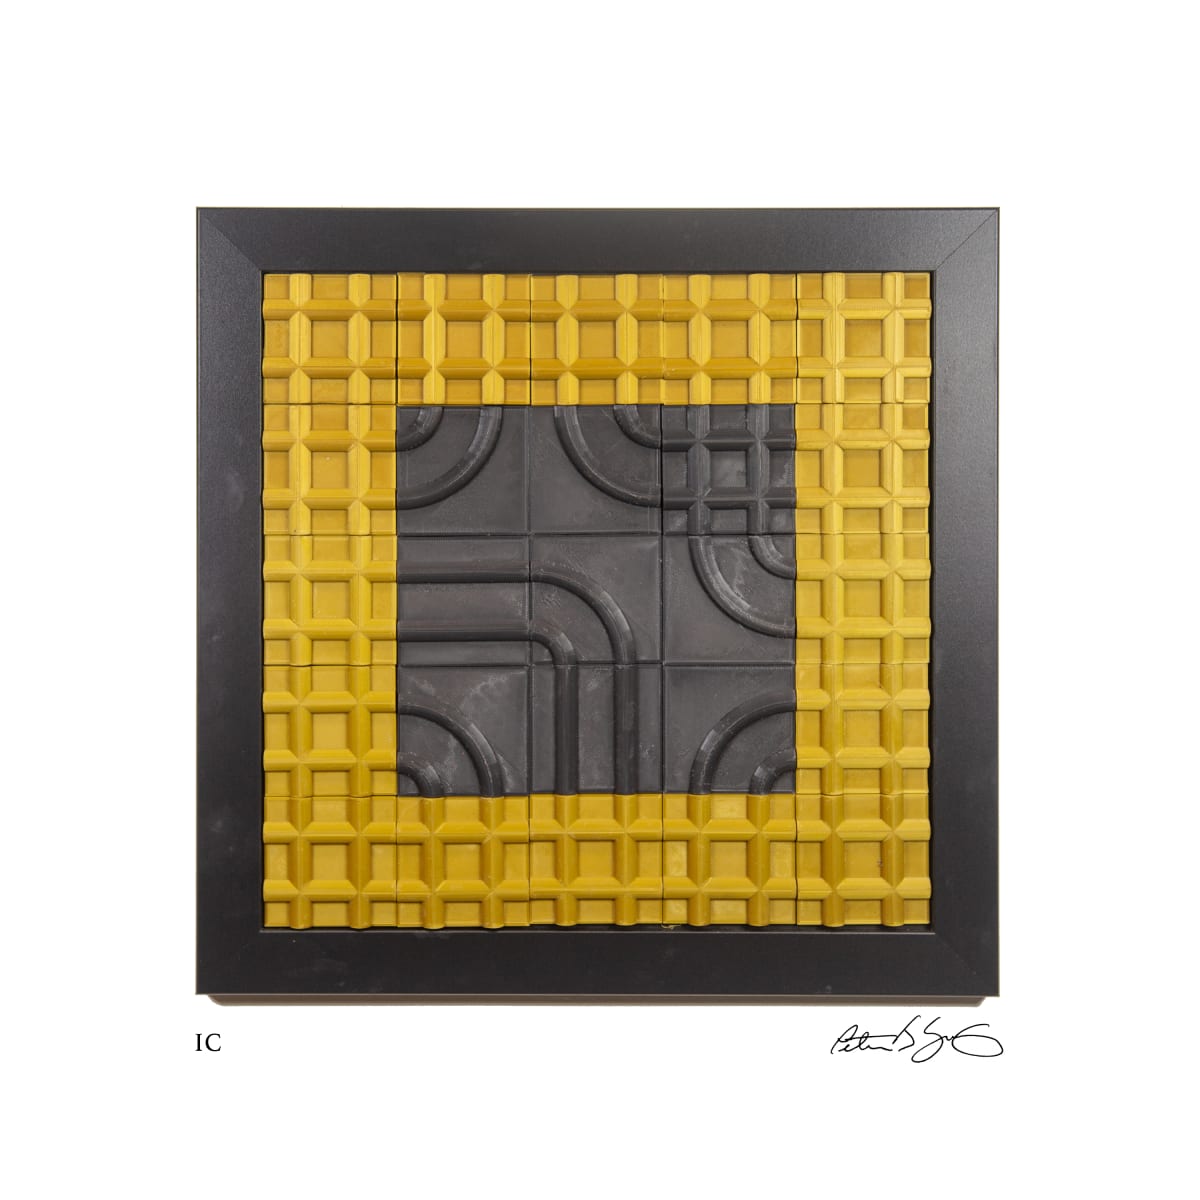 IC by Peter J Sucy Digital Arts  Image: "IC" - Integrated Circuit